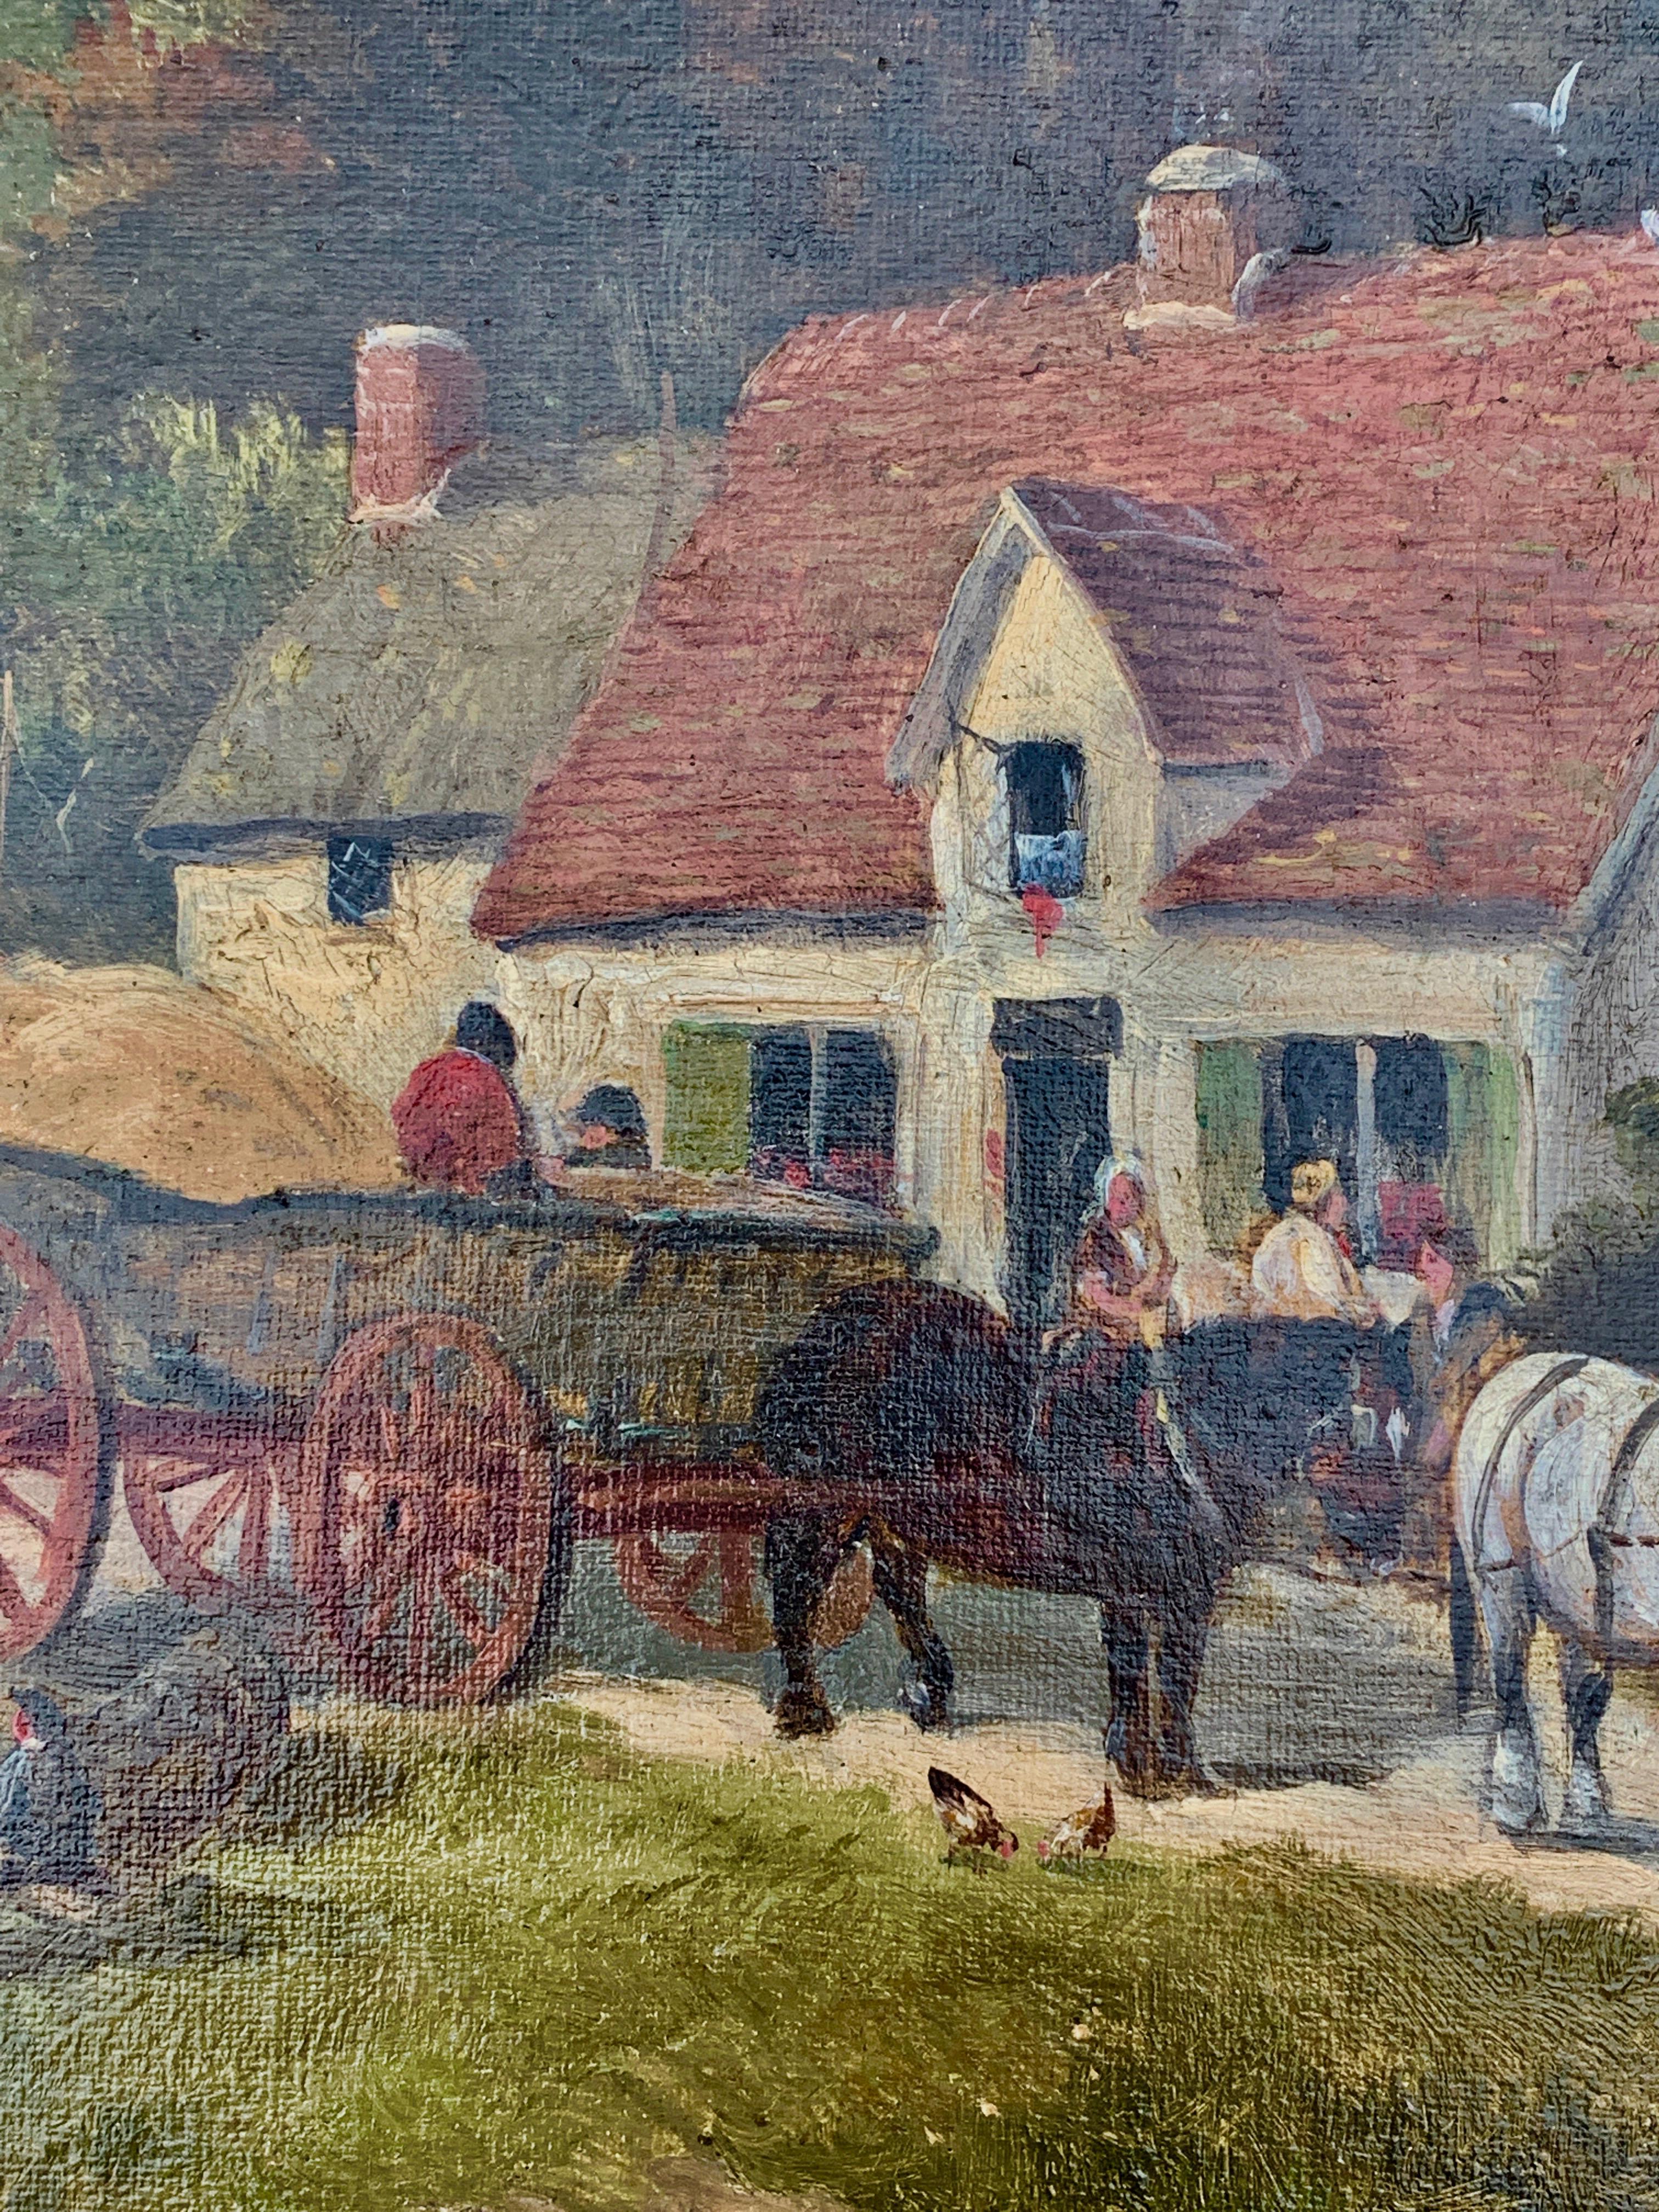 English Victorian 19th century Cottage landscape with horses and cart - Painting by William Meadows